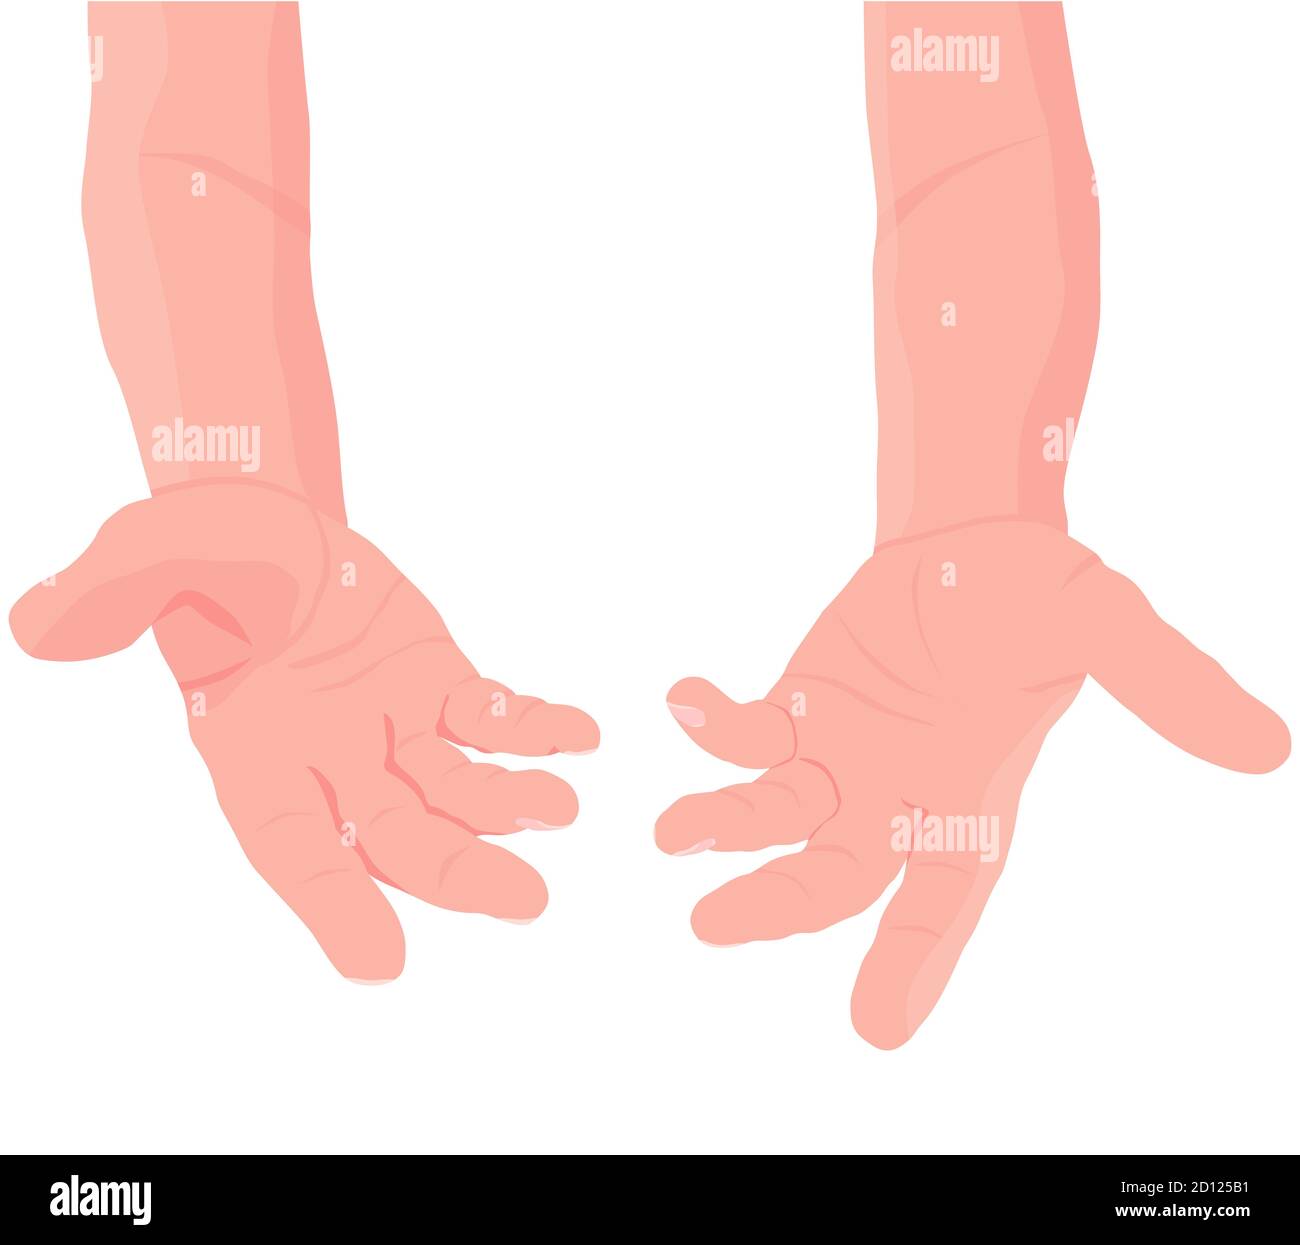 Human open hands. Pair of men hands with exposed palm, request or donation. Flat illustration. Vector Stock Vector